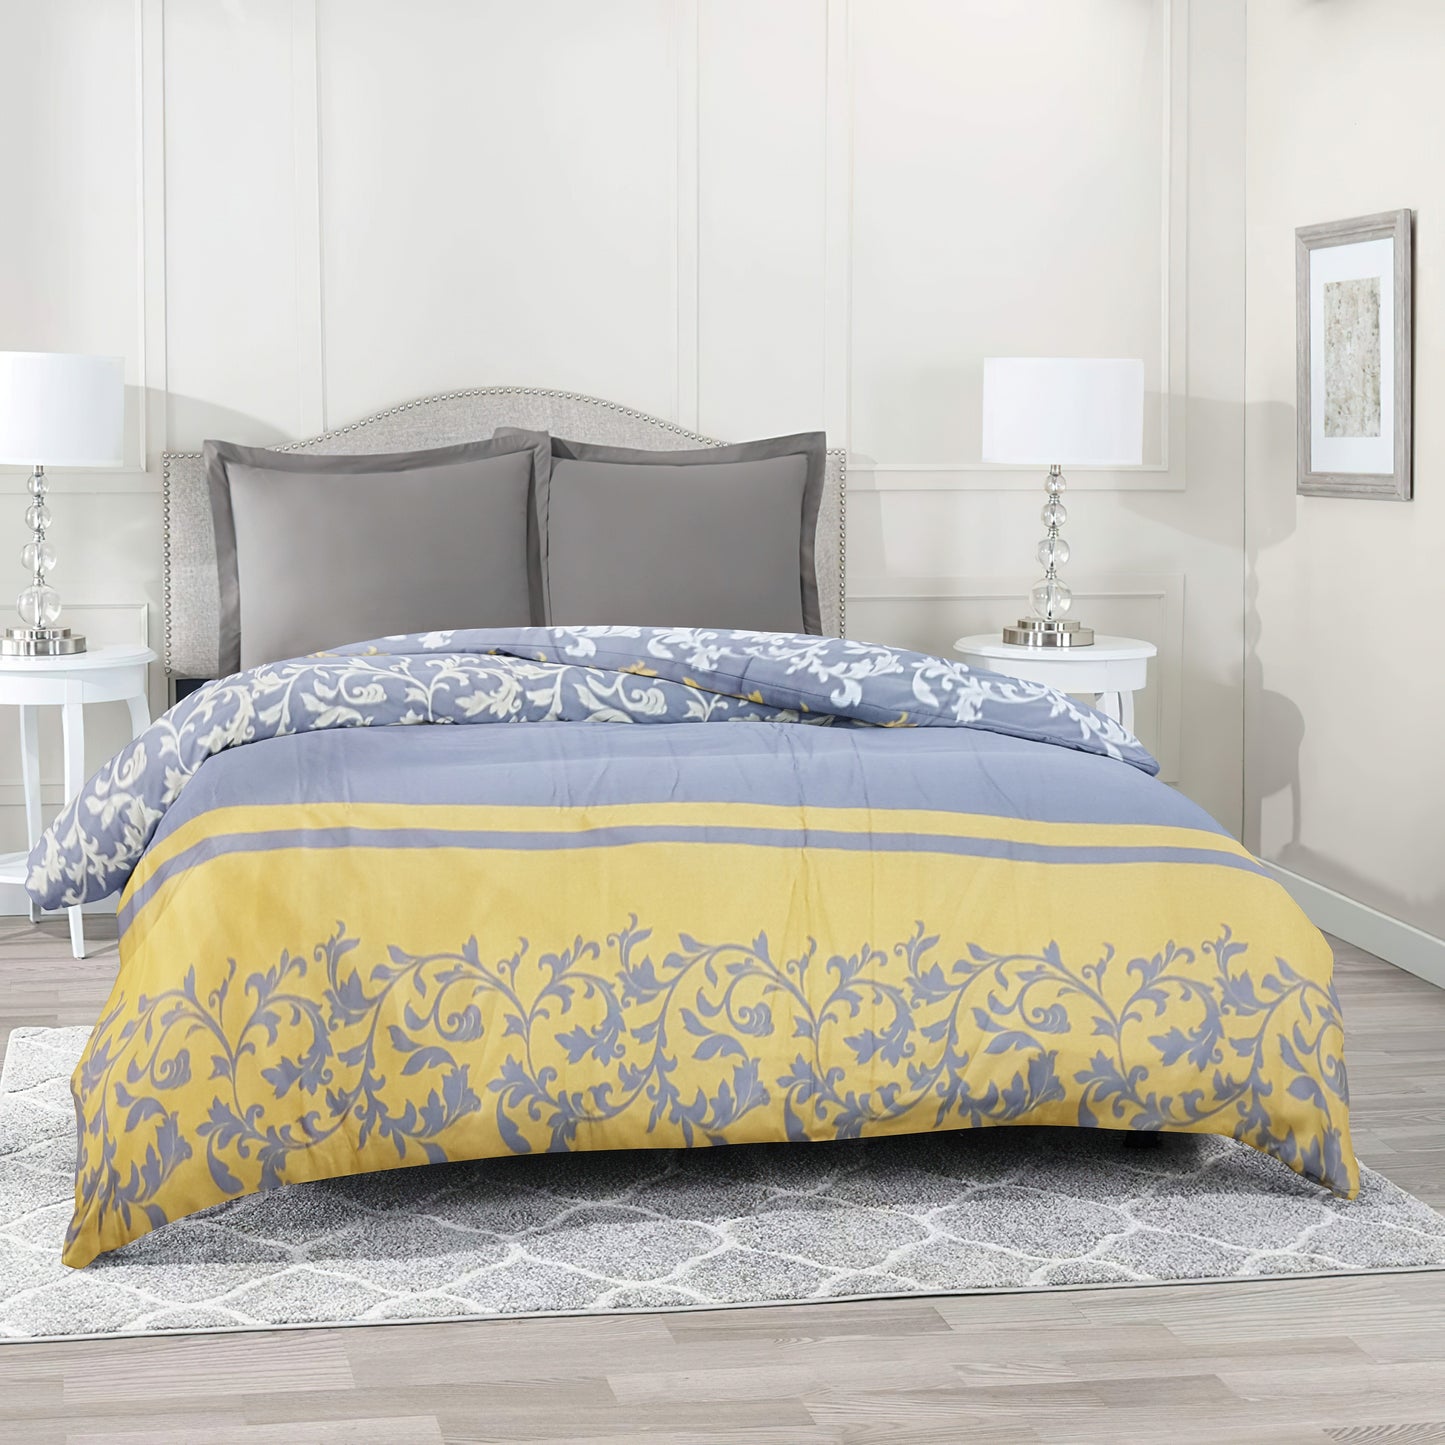 Duvet/Quilt Covers Soft Plush Pure Cotton Printed Floral on Royal Yellow and Grey